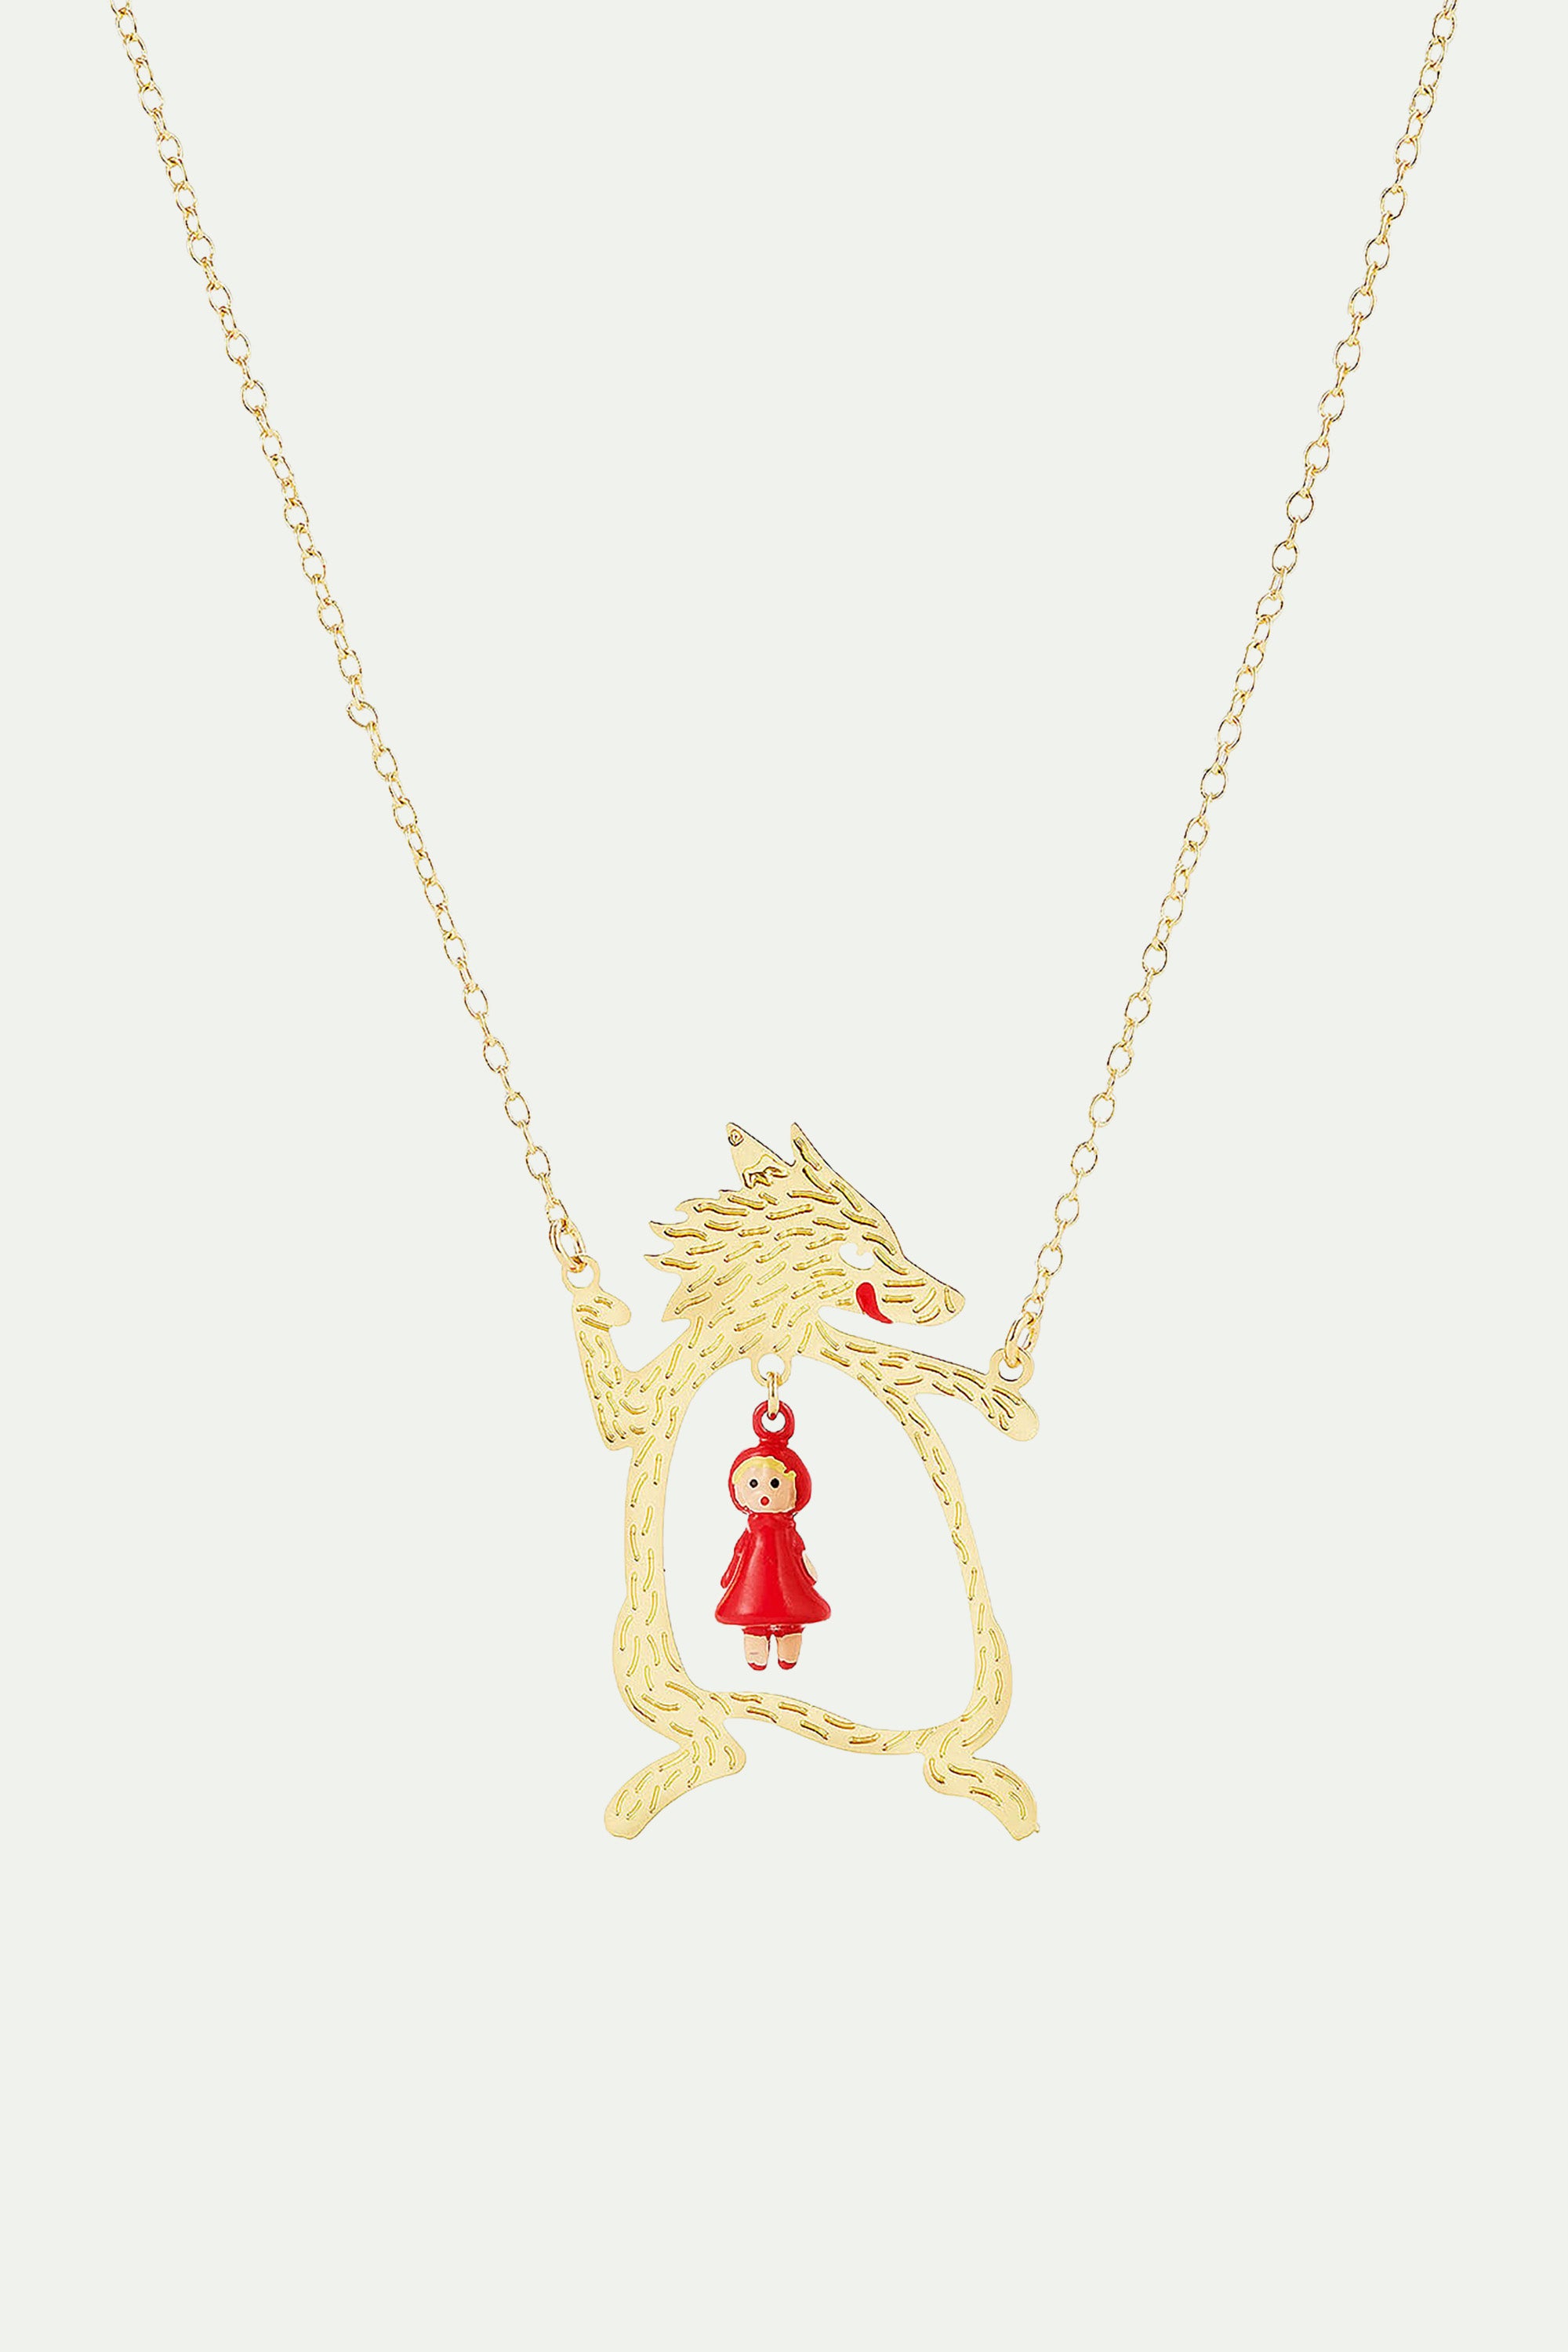 Golden Big Bad Wolf and Little Red Riding Hood pendant necklace